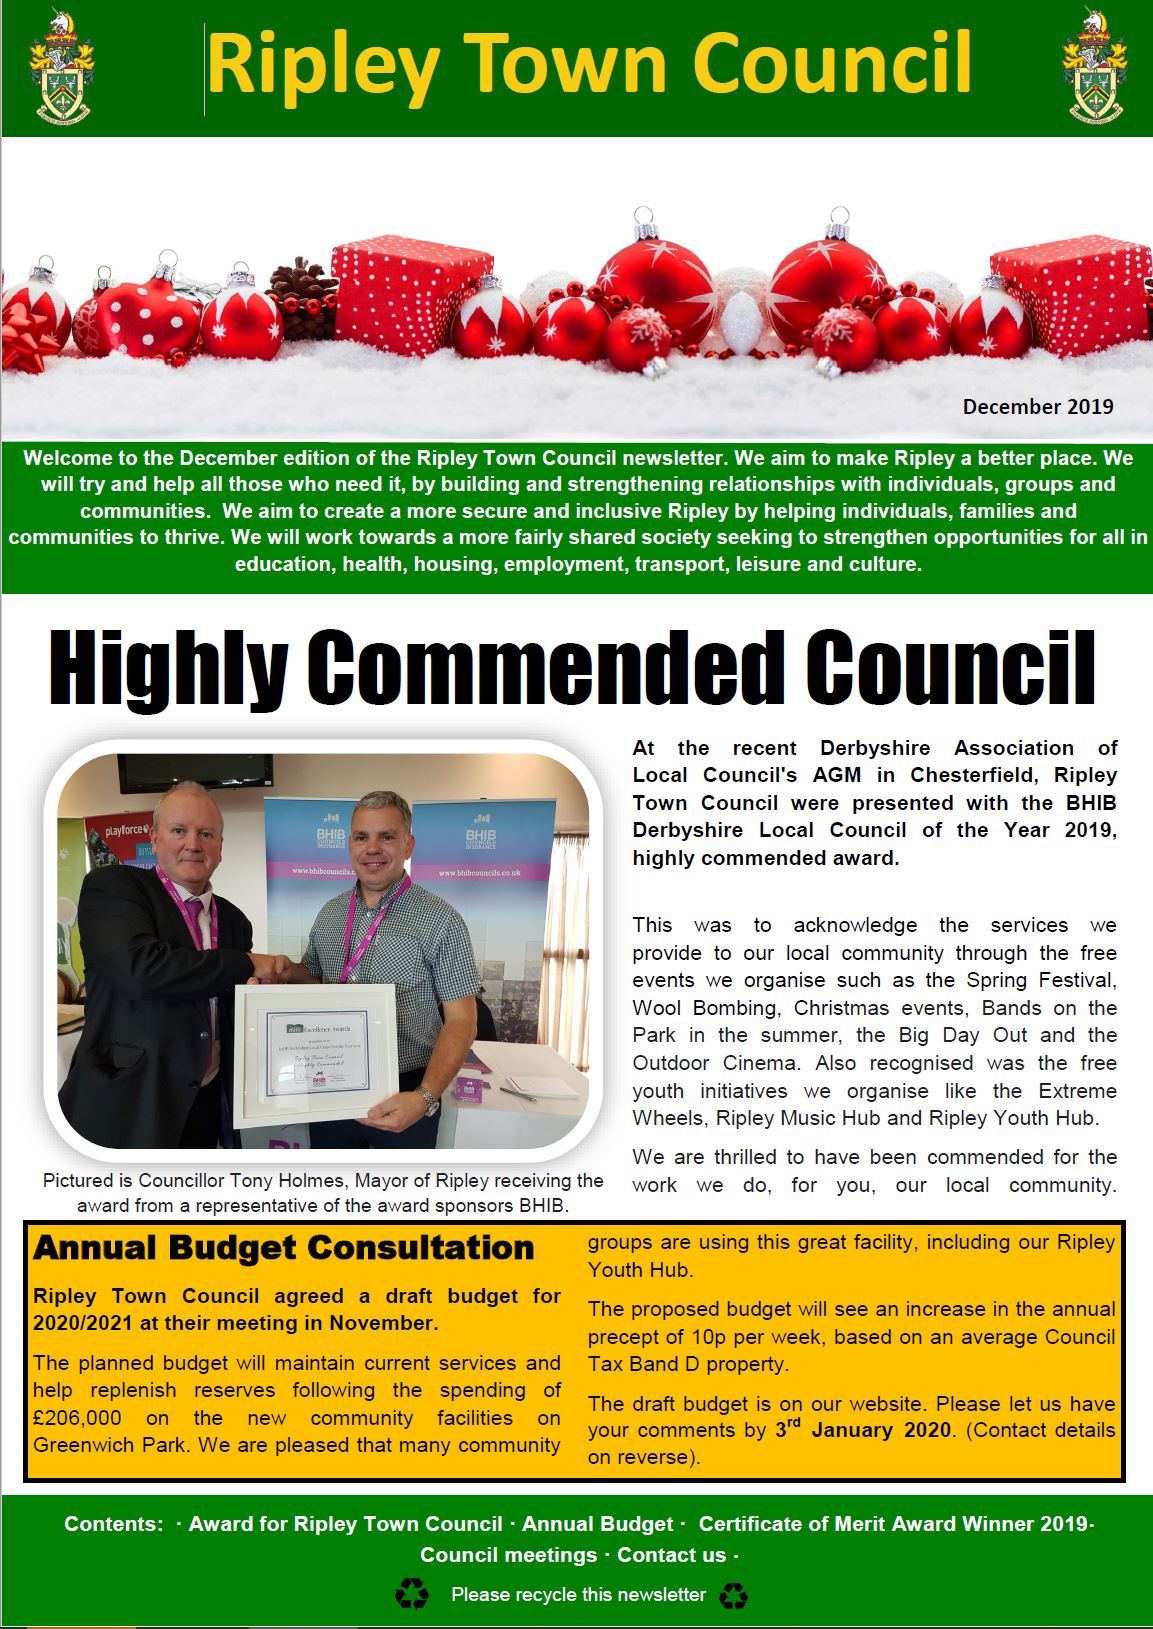 Ripley Town Council Newsletter